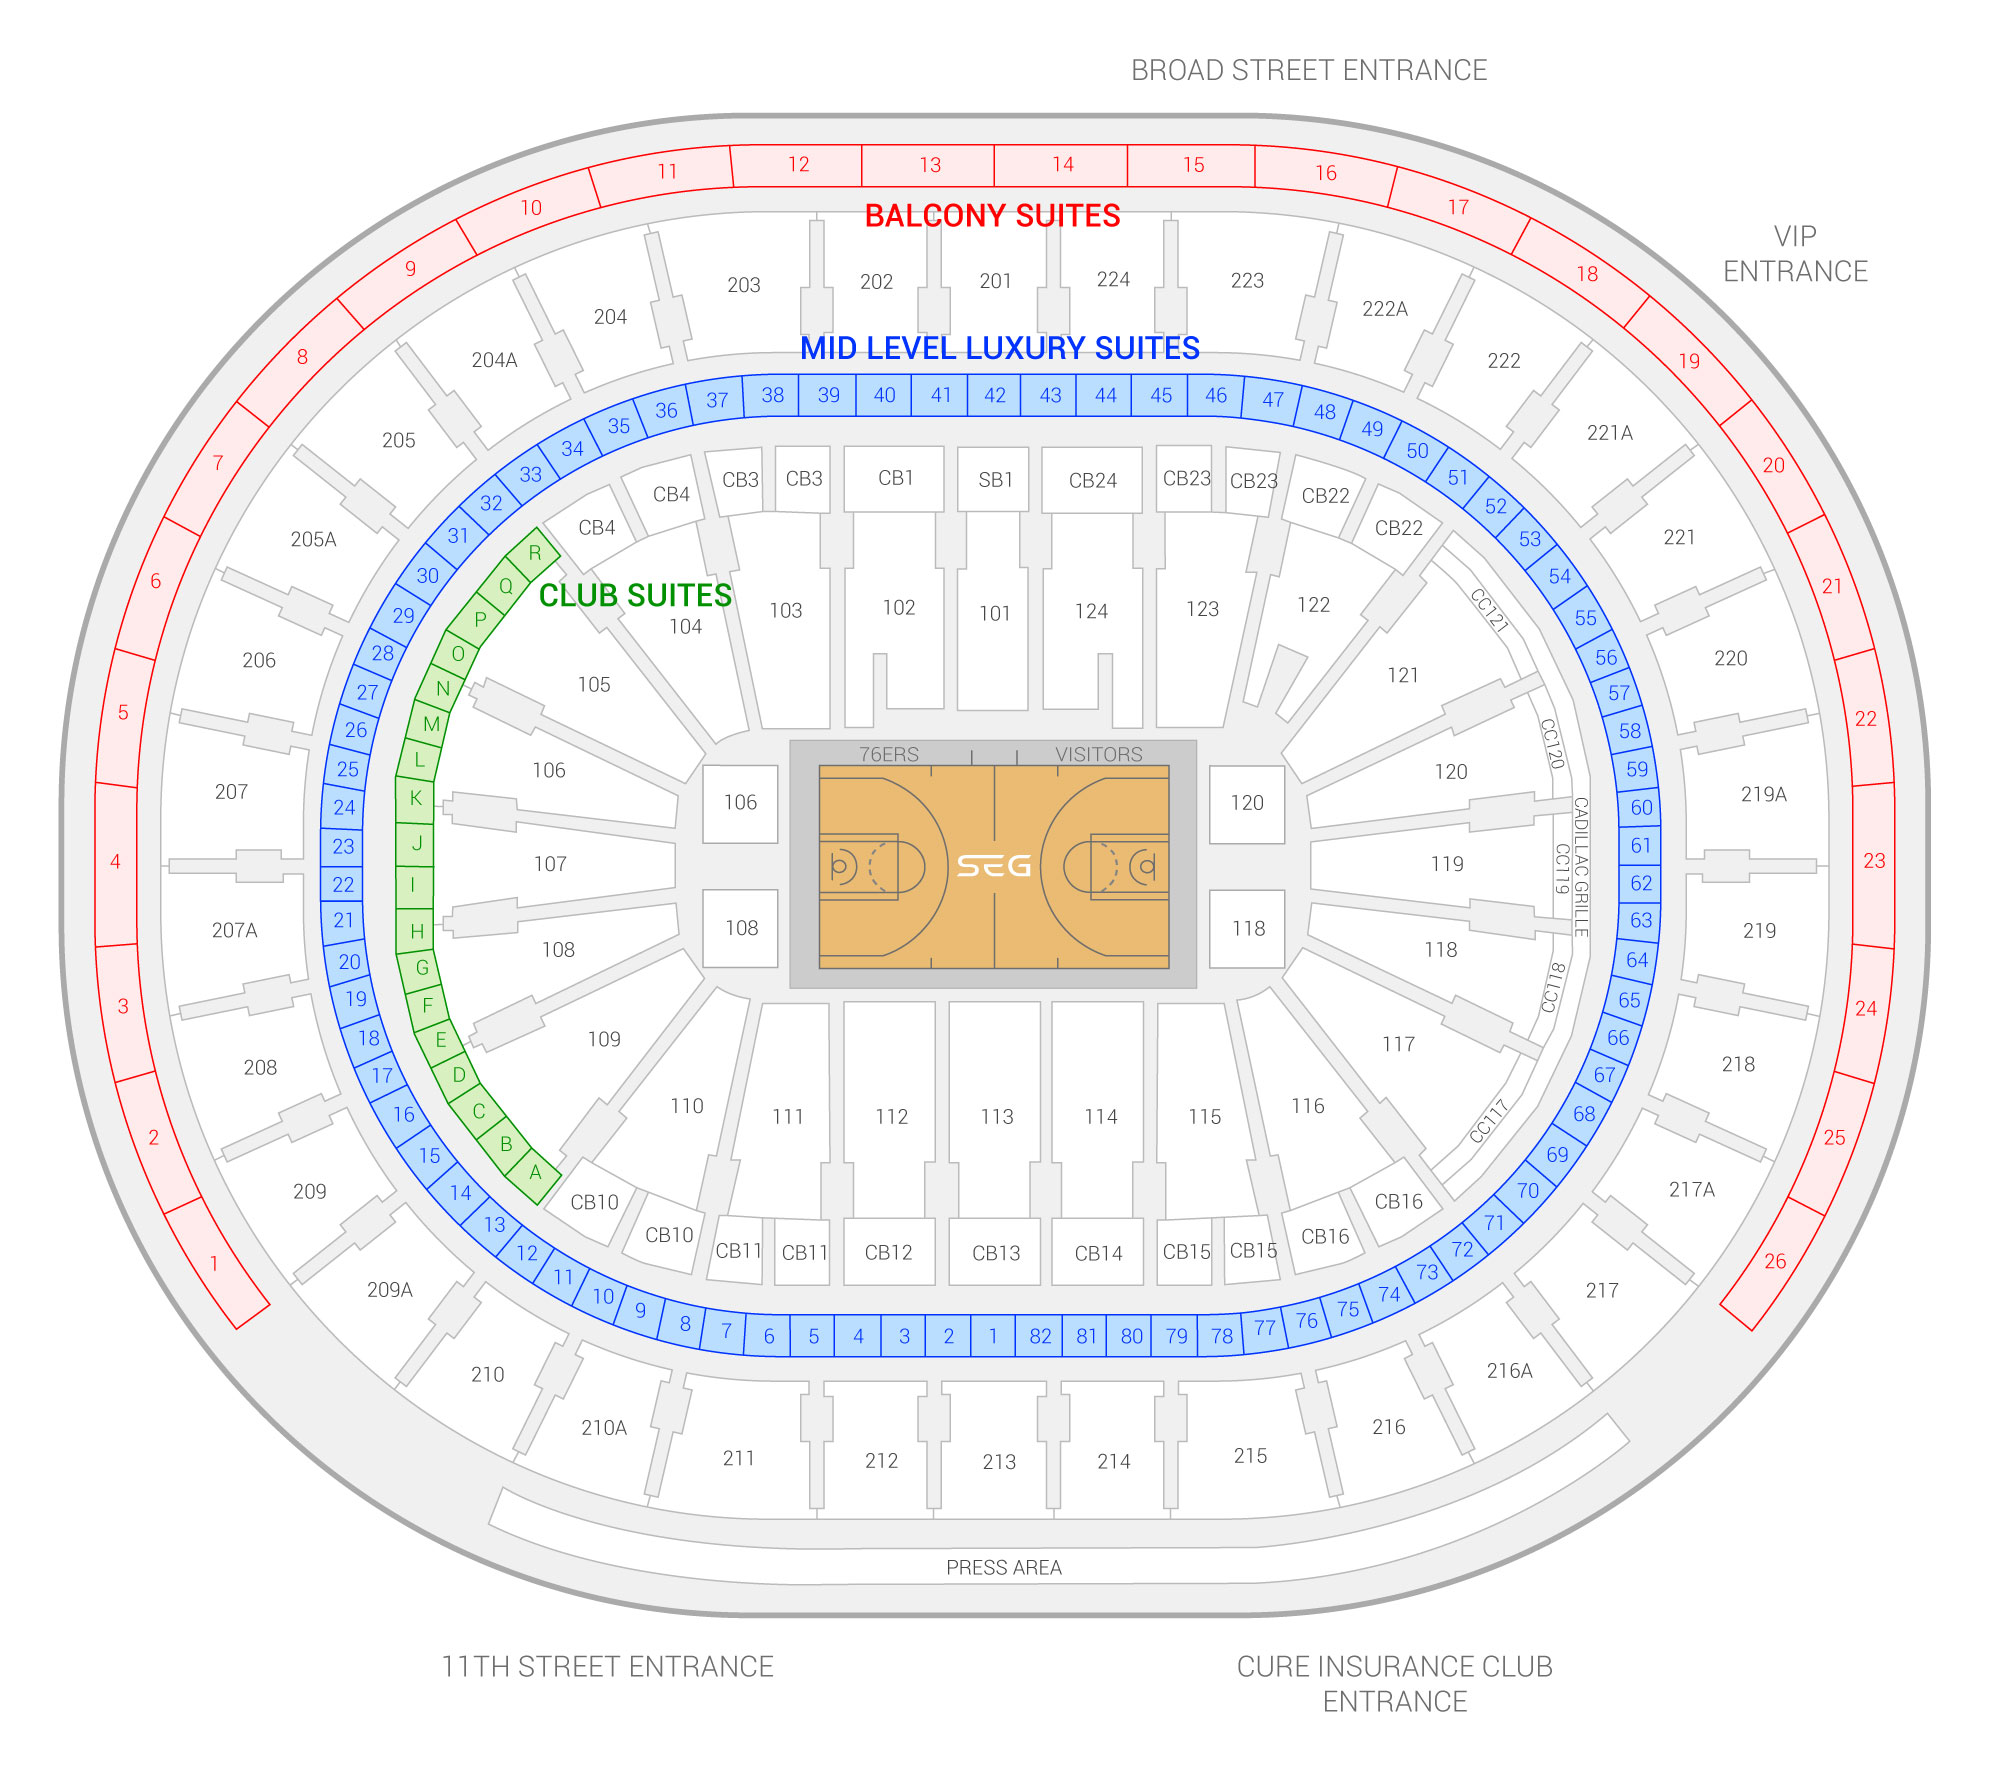 Wells Fargo Center / Philadelphia 76ers Suite Map and Seating Chart